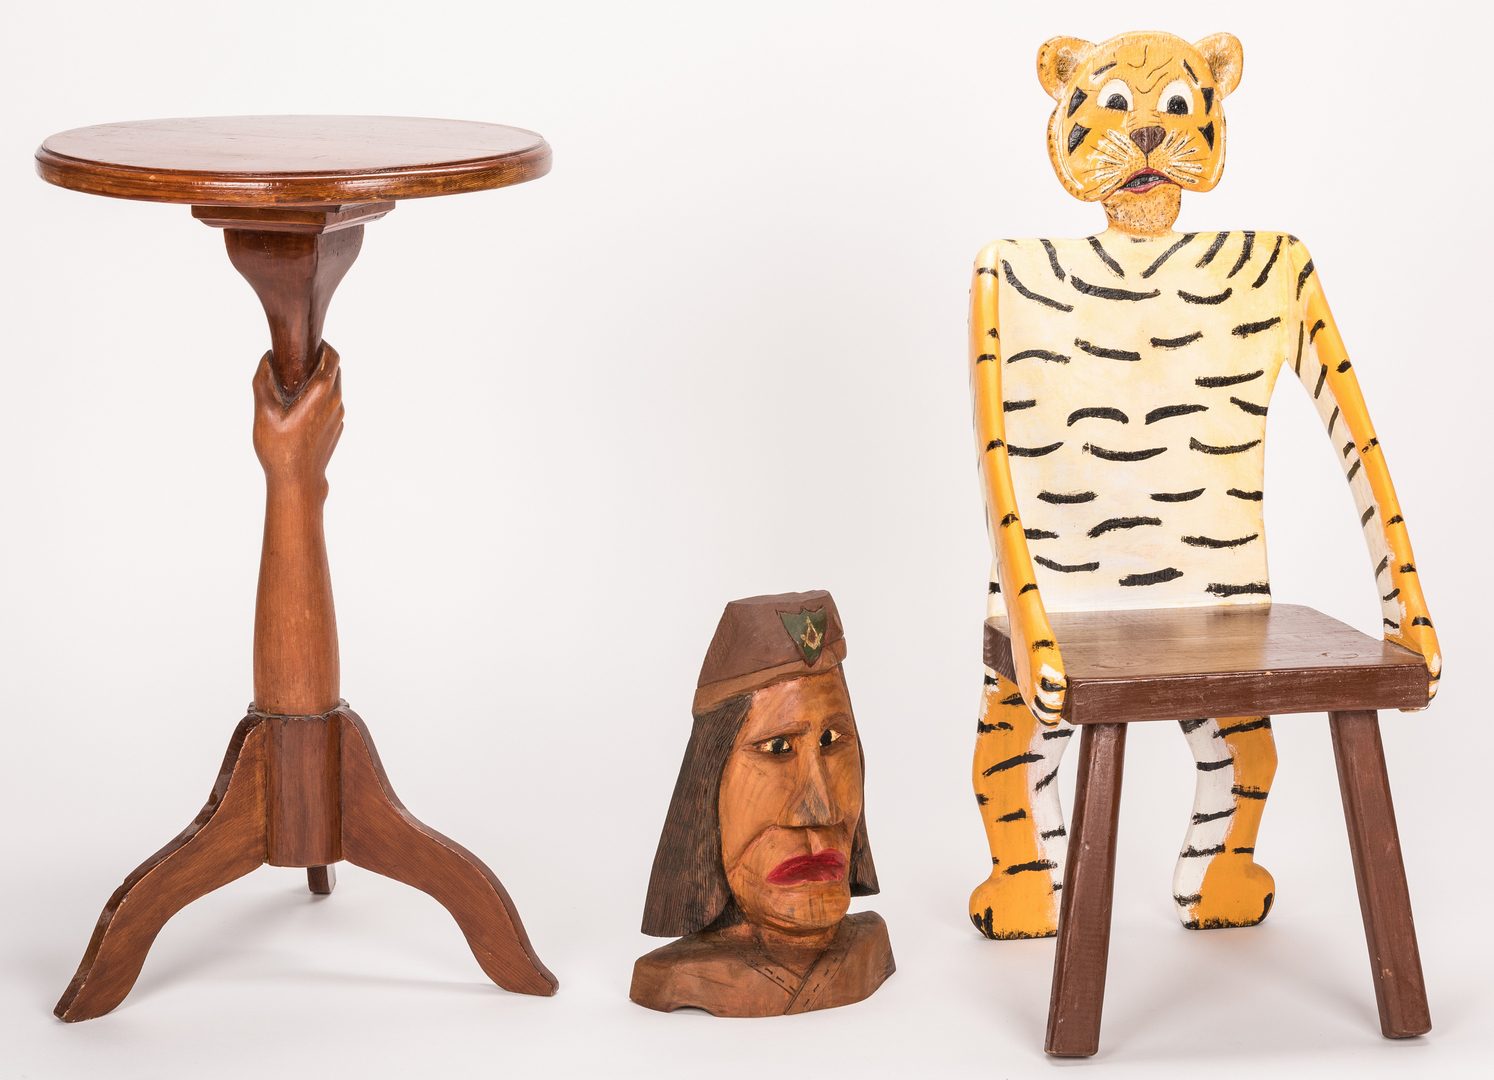 Lot 669: Pugh Tiger Chair & Indian Carving + Folk Art Table, 3 items